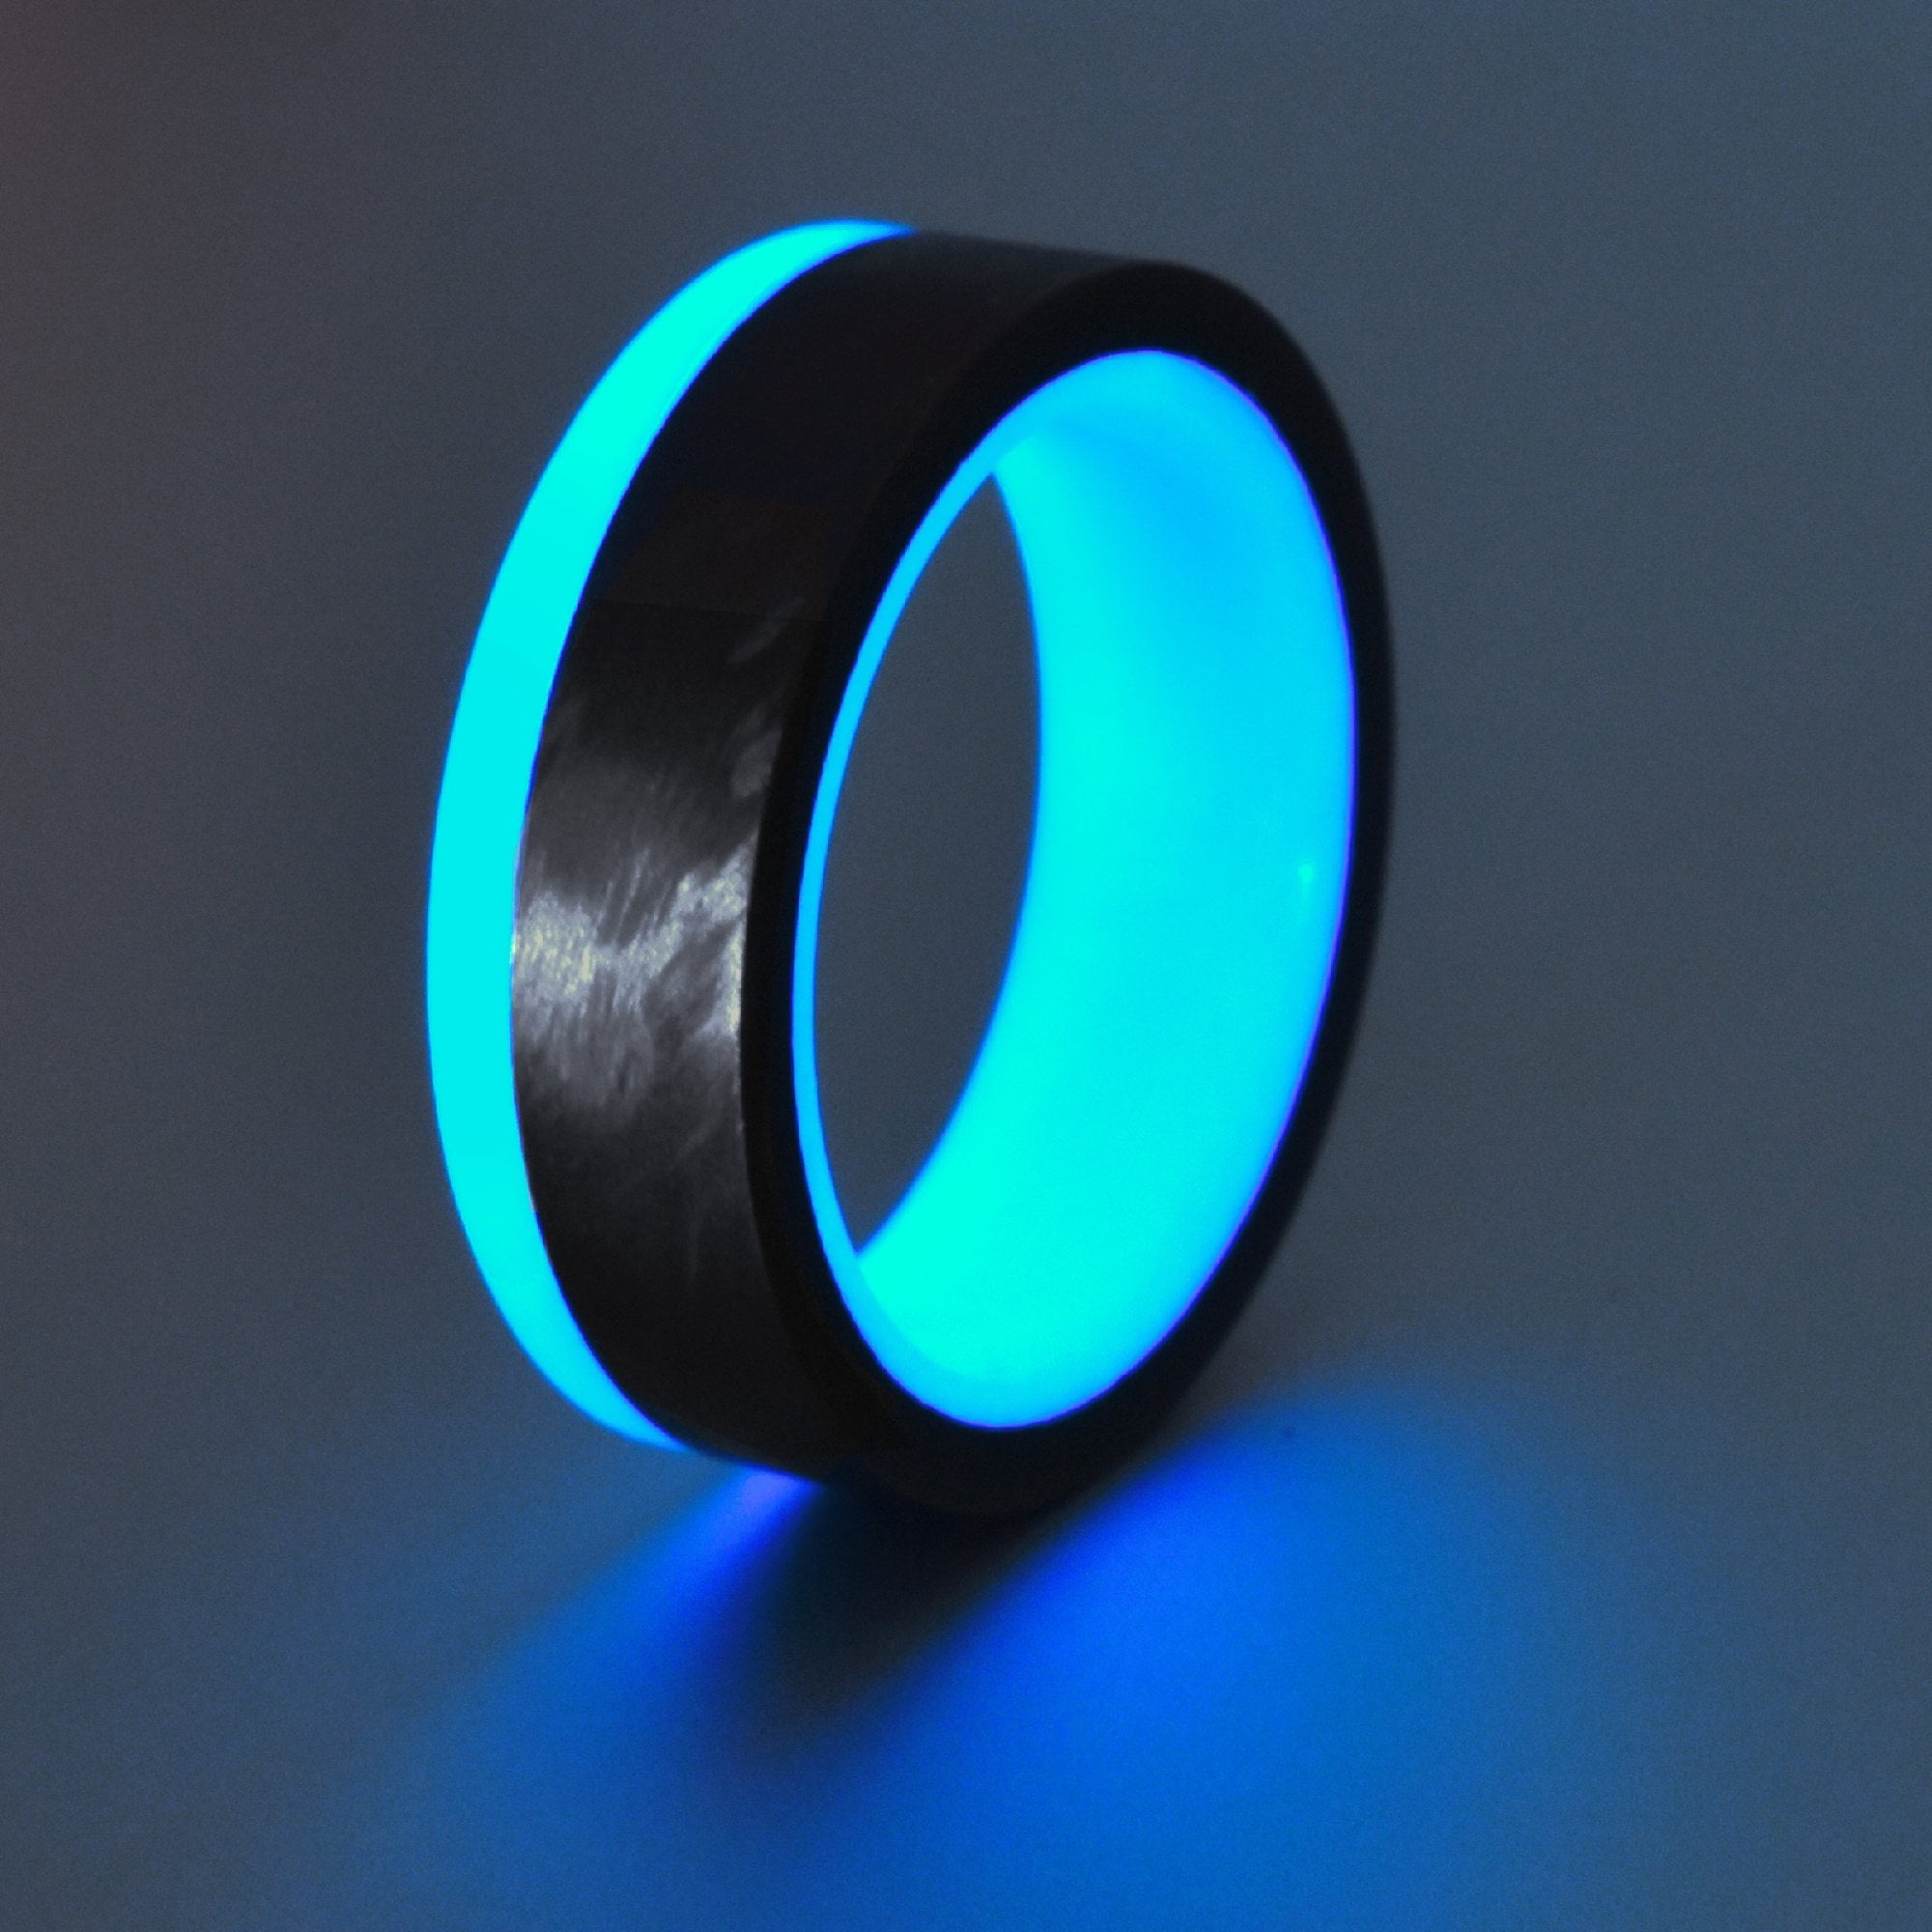 Turquoise Glow Ring with Filament Wound Carbon Fiber exterior and glow rim.